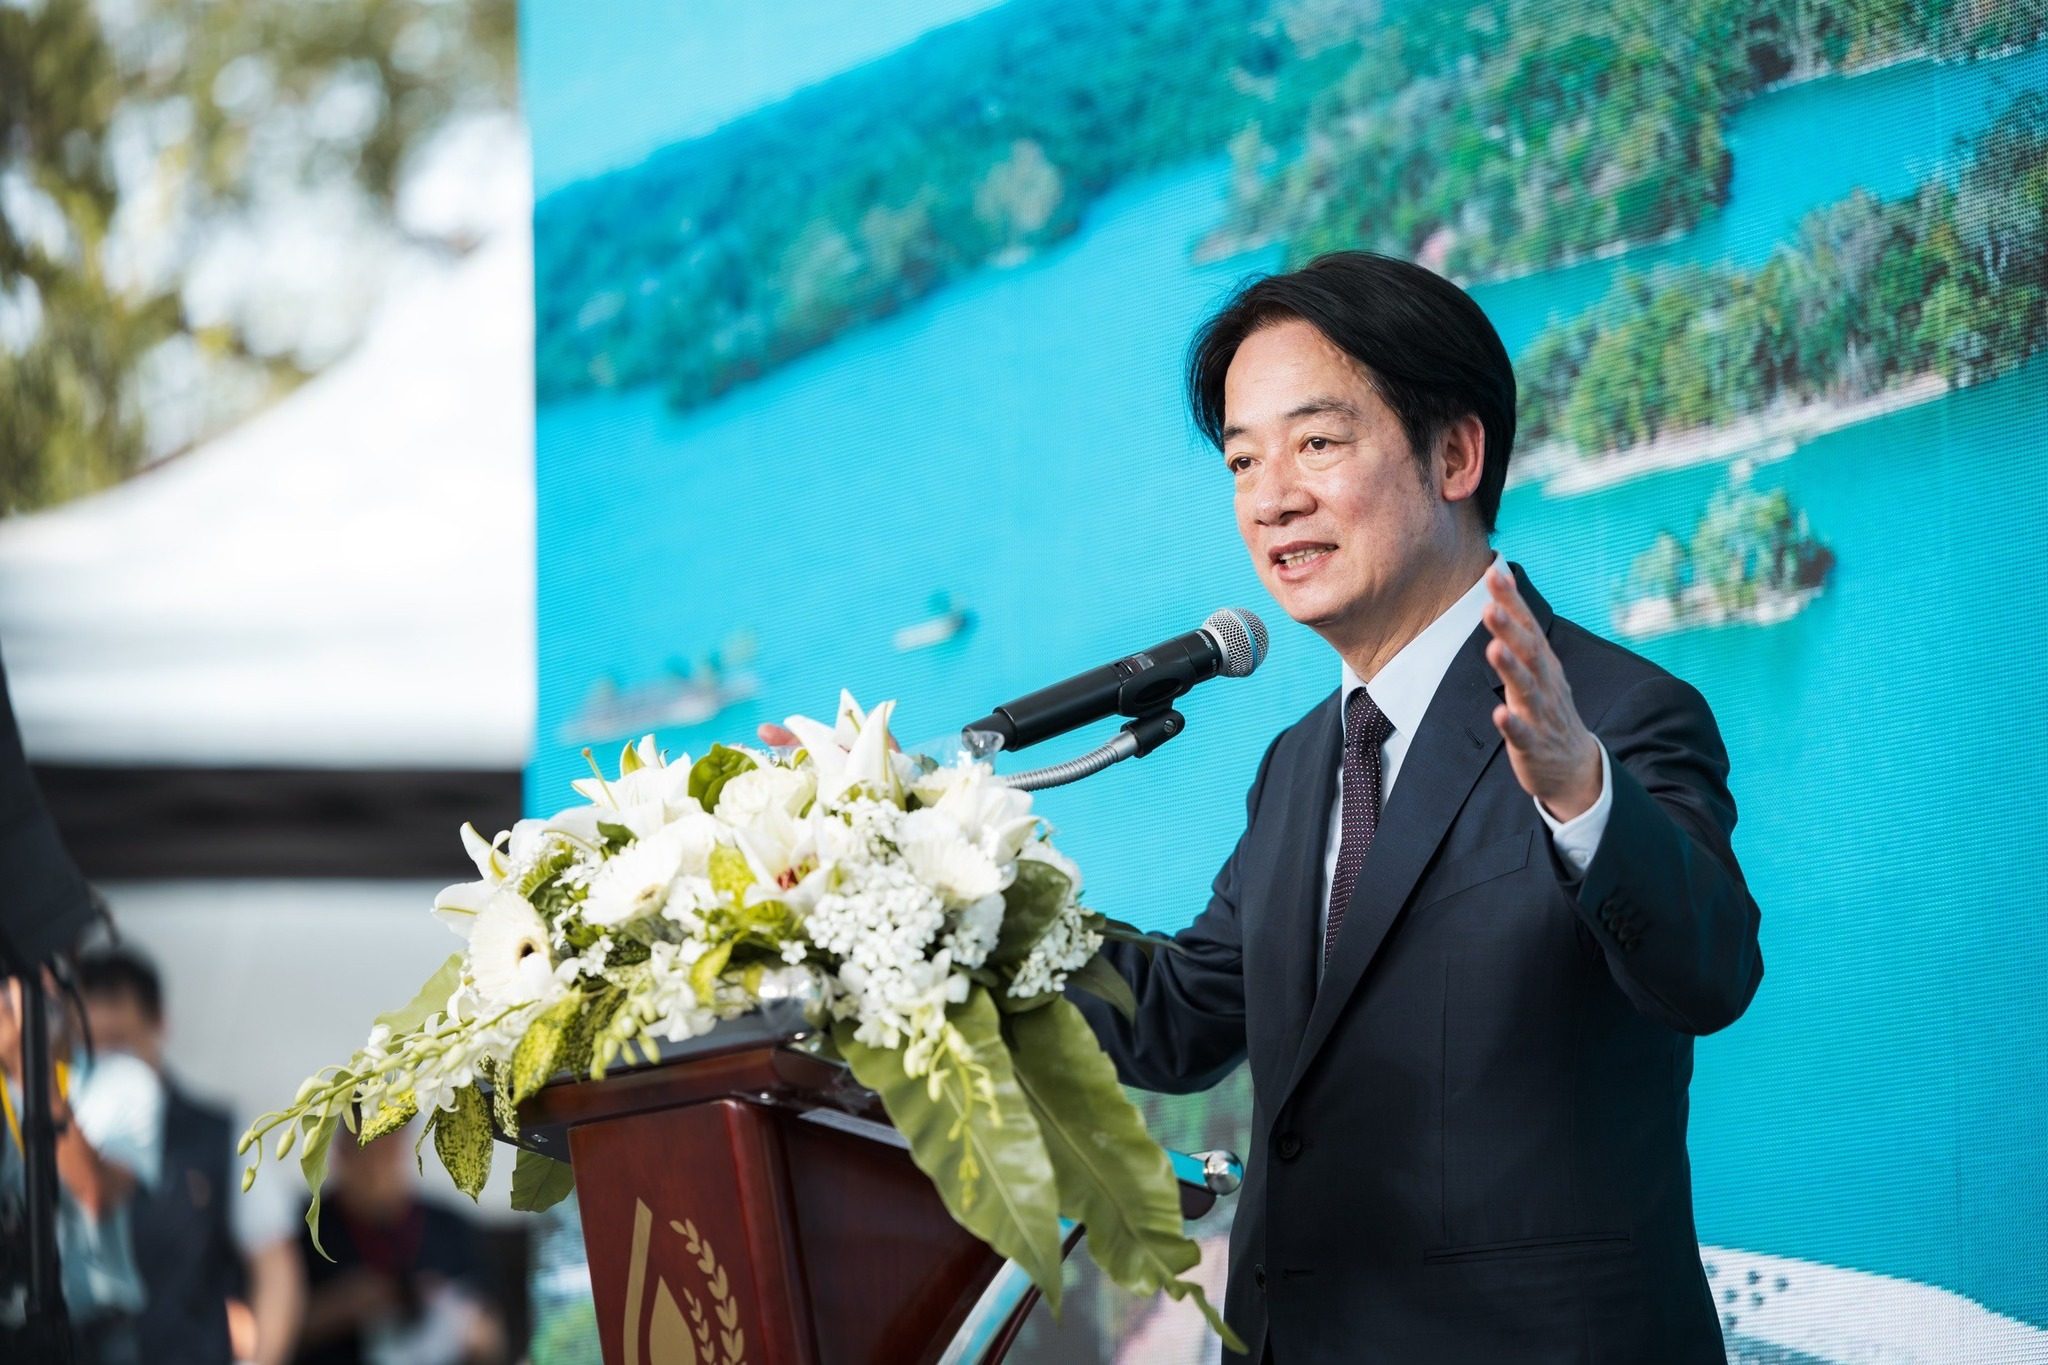 Taiwanese president-elect William Lai Ching-te addresses a commemorative event for Japanese engineer Yoichi Hatta, in southern Taiwan’s Tainan on Wednesday. Photo: Facebook/William Lai Ching-te